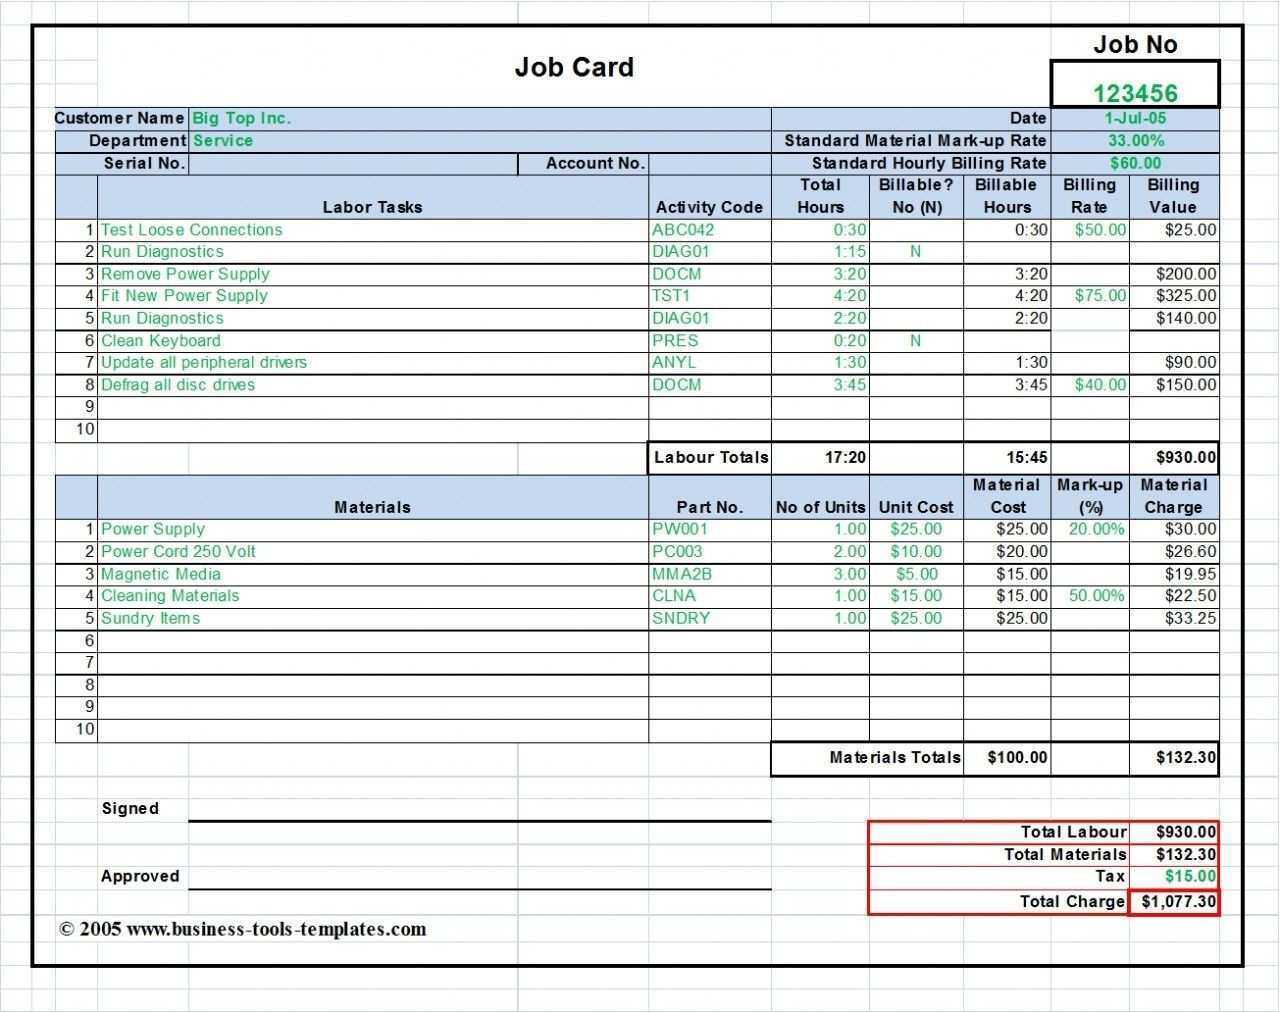 23 Blank Job Card Template Word For Ms Word For Job Card In Rate Card Template Word